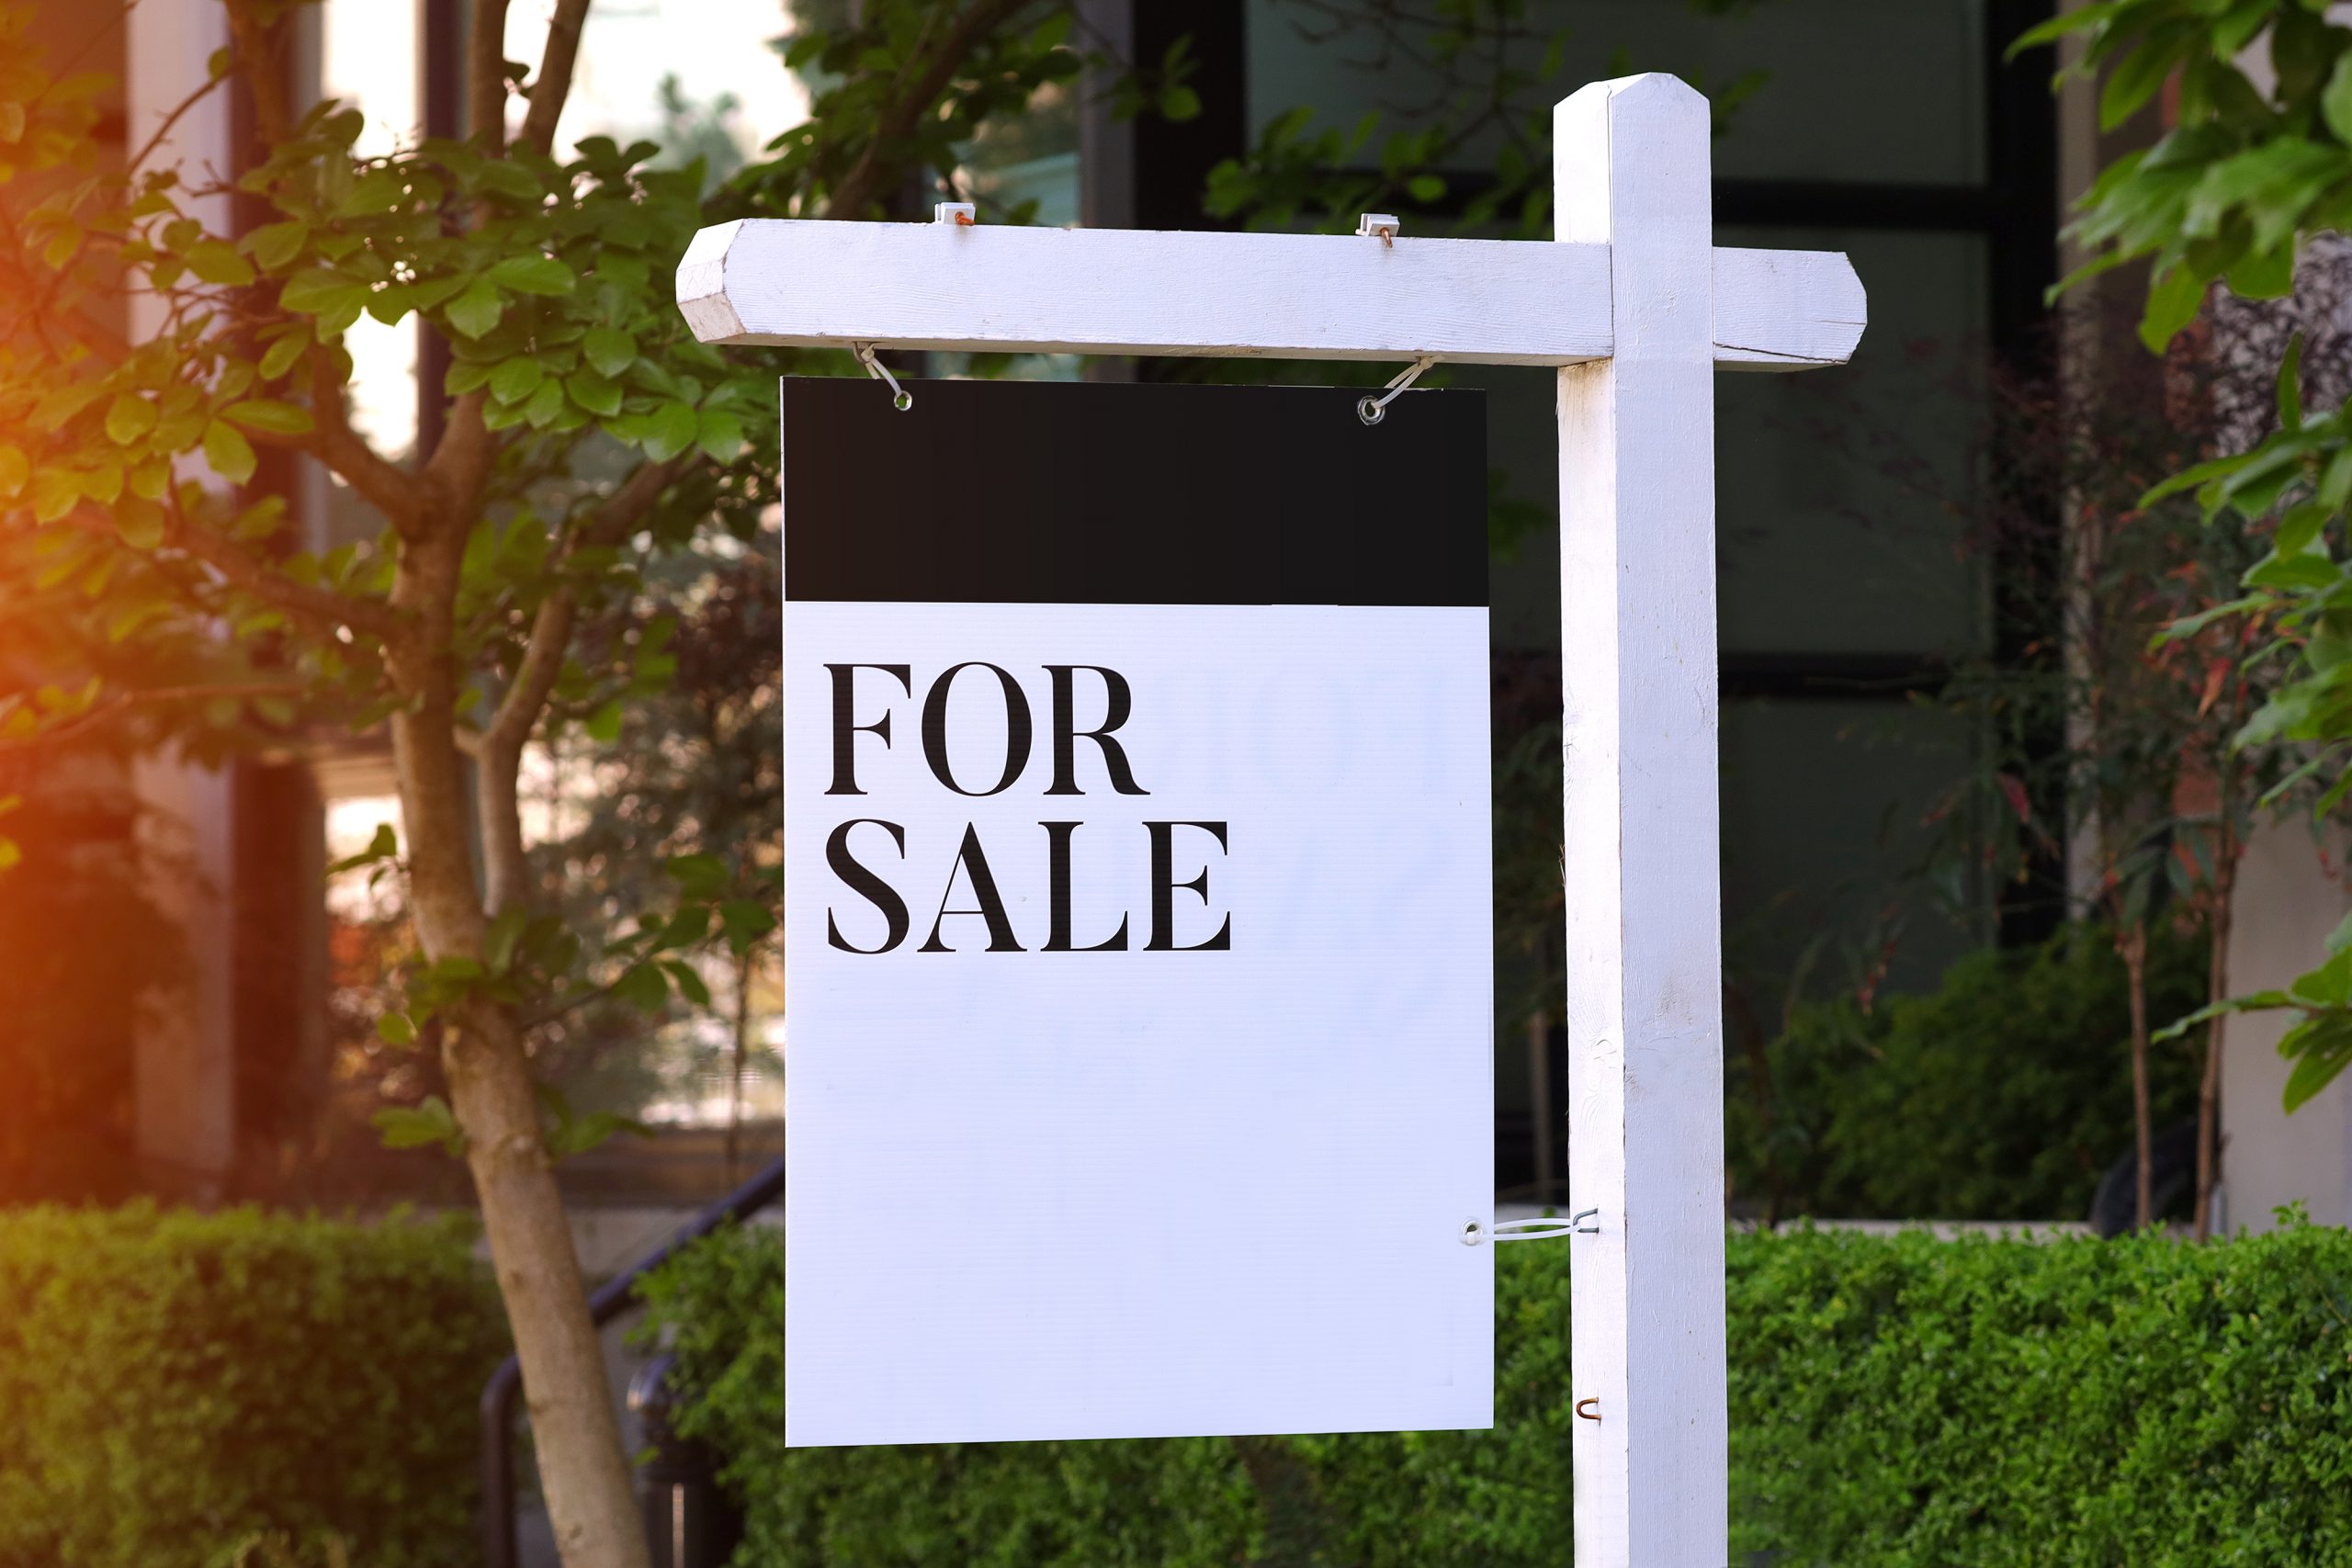 Selling Your Property on LASTBIDrealestate: A Step-by-Step Guide